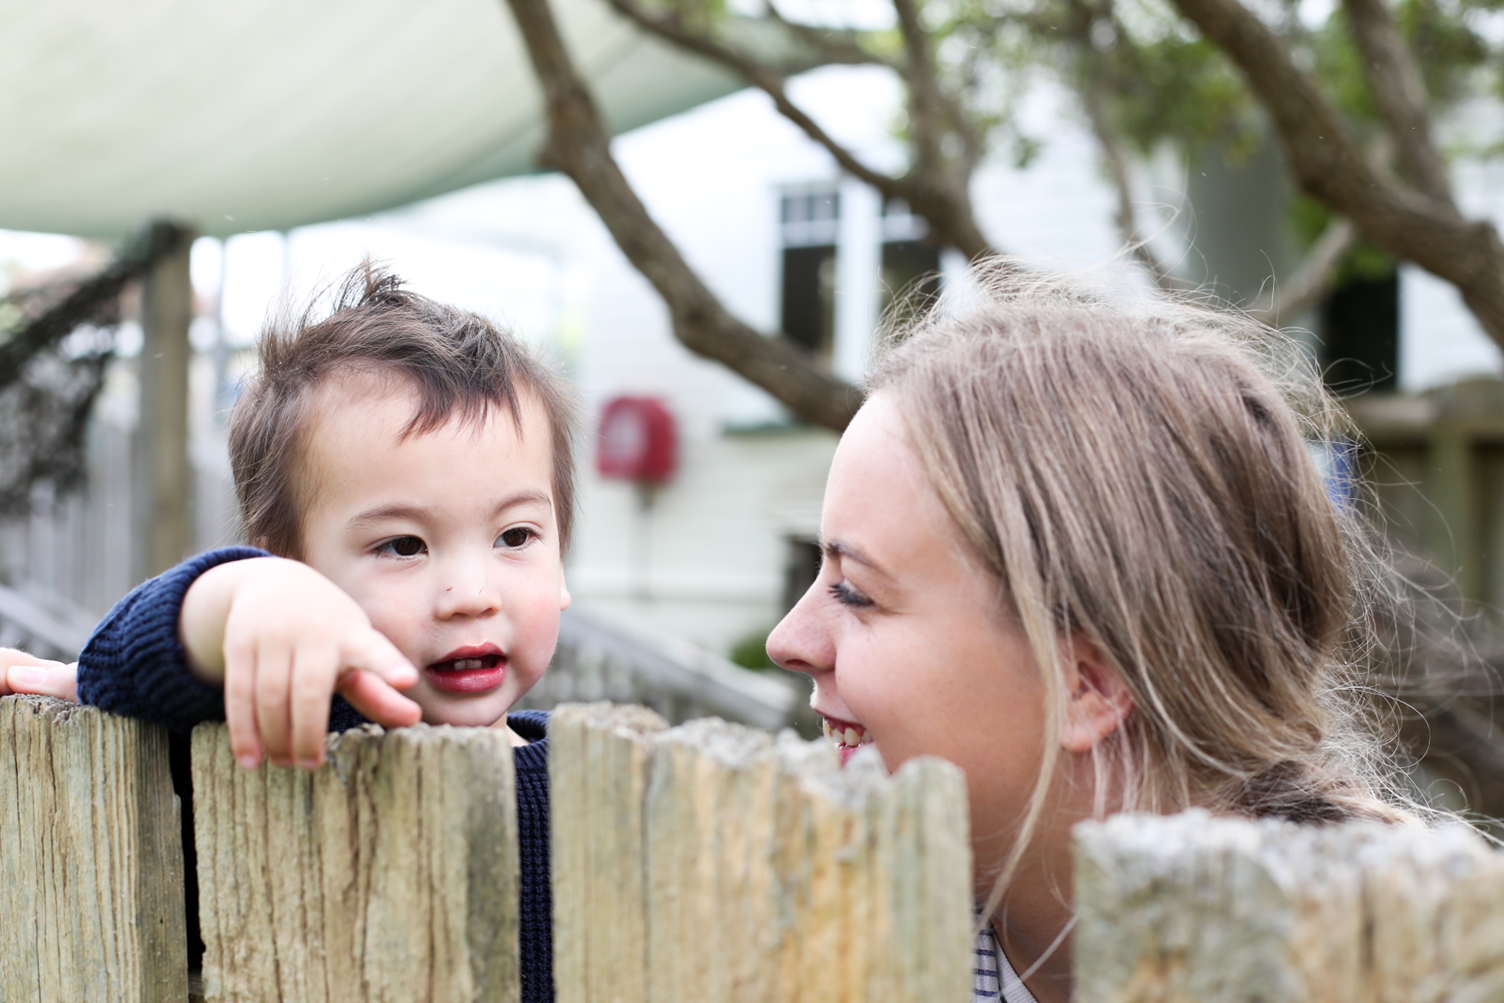 Teacher smiling at young child while looking over a fence.